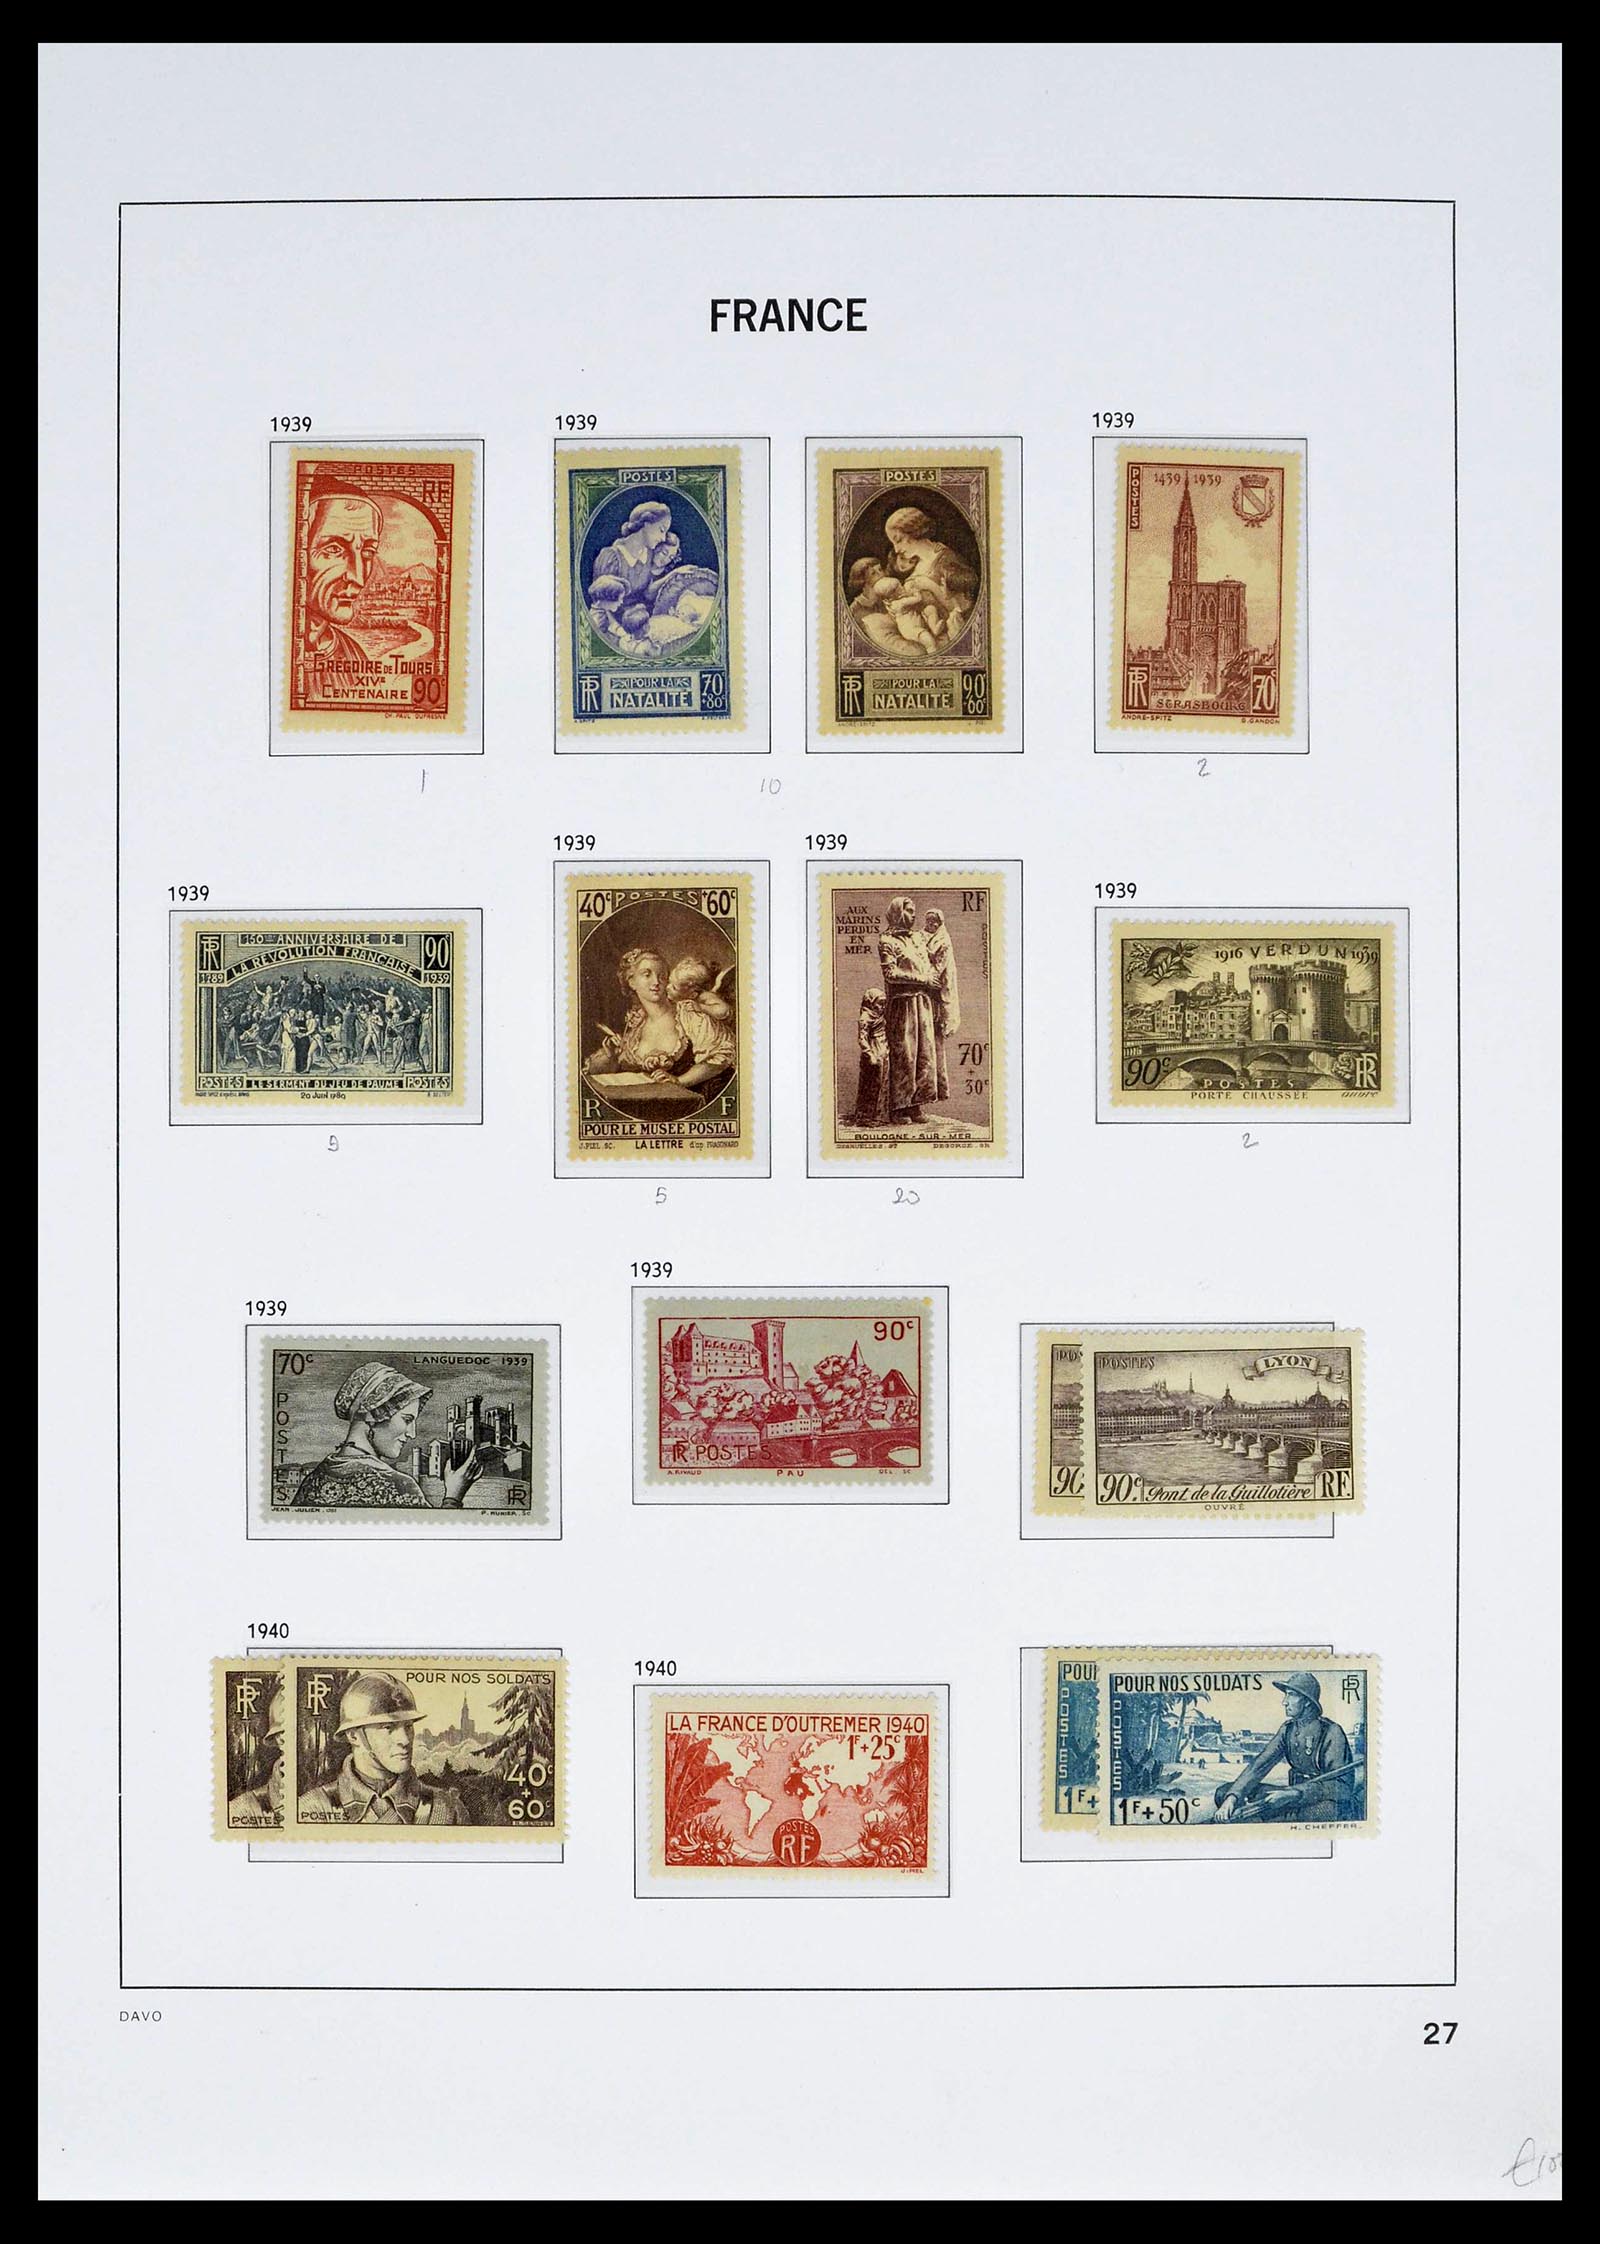 39335 0042 - Stamp collection 39335 France 1849-1969.